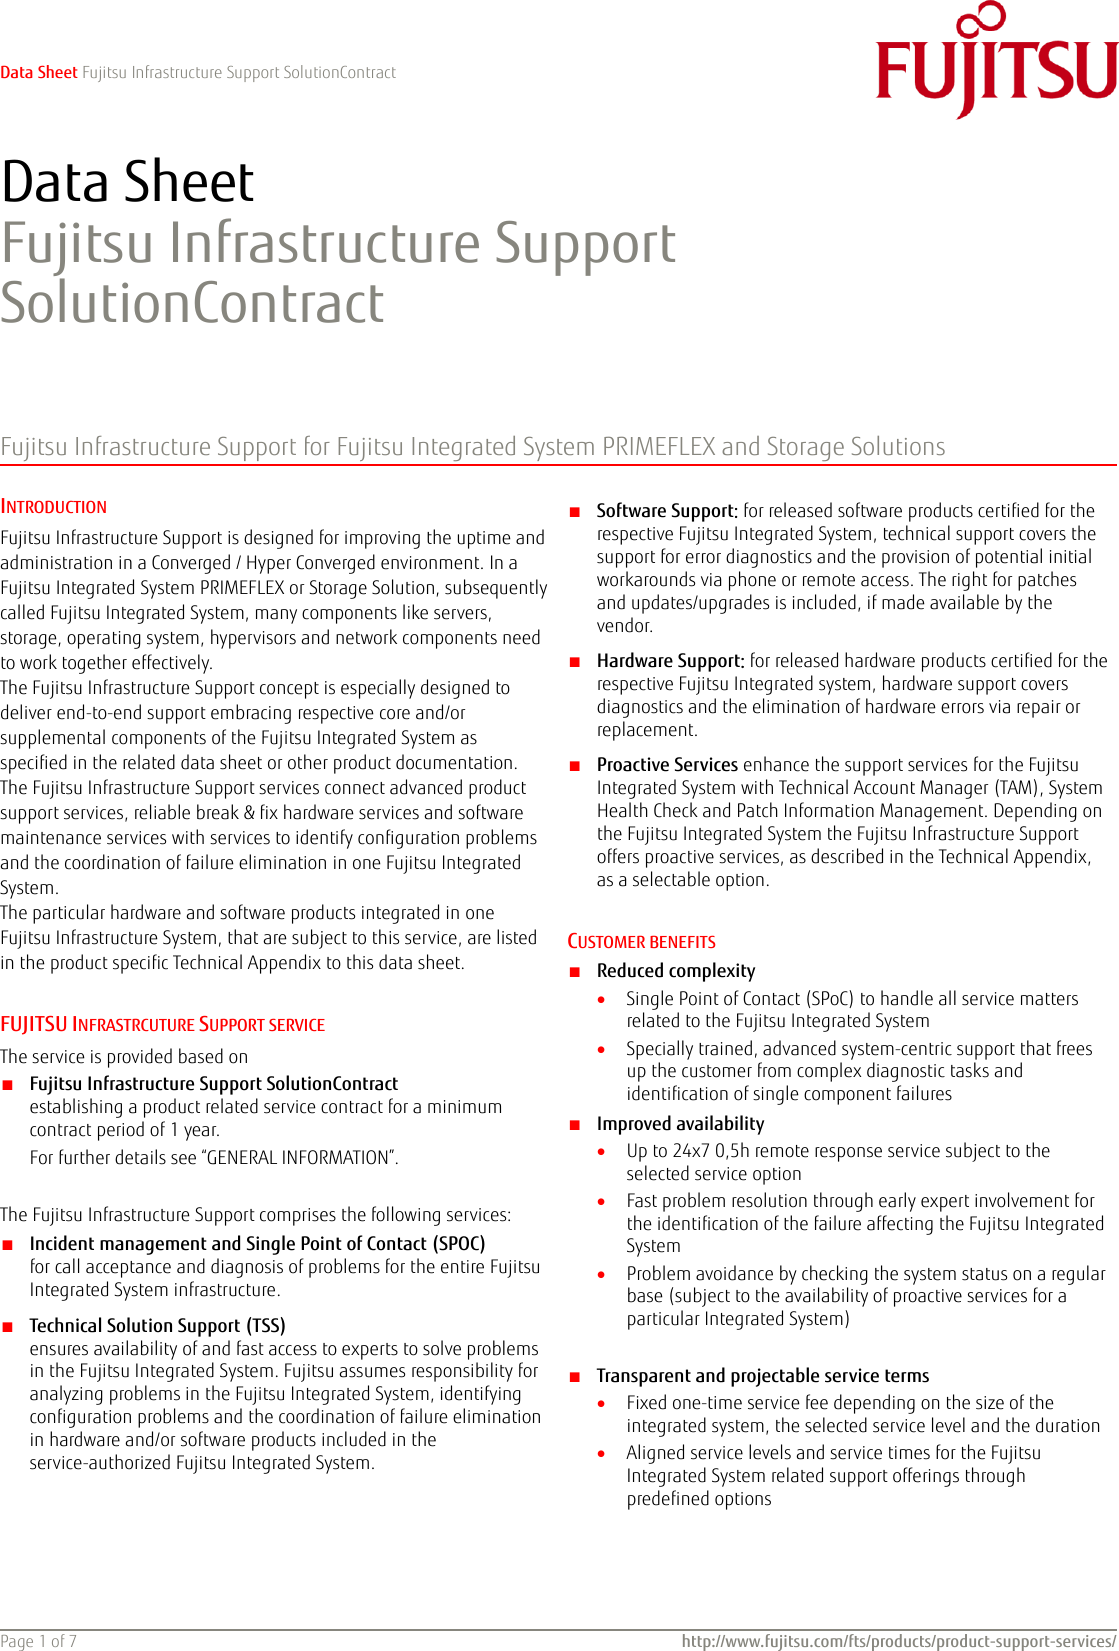 Page 1 of 7 - Data Sheet FUJITSU Infrastructure Support SolutionContract Solution Contract Ds-services-FIS-Solution Contract-en